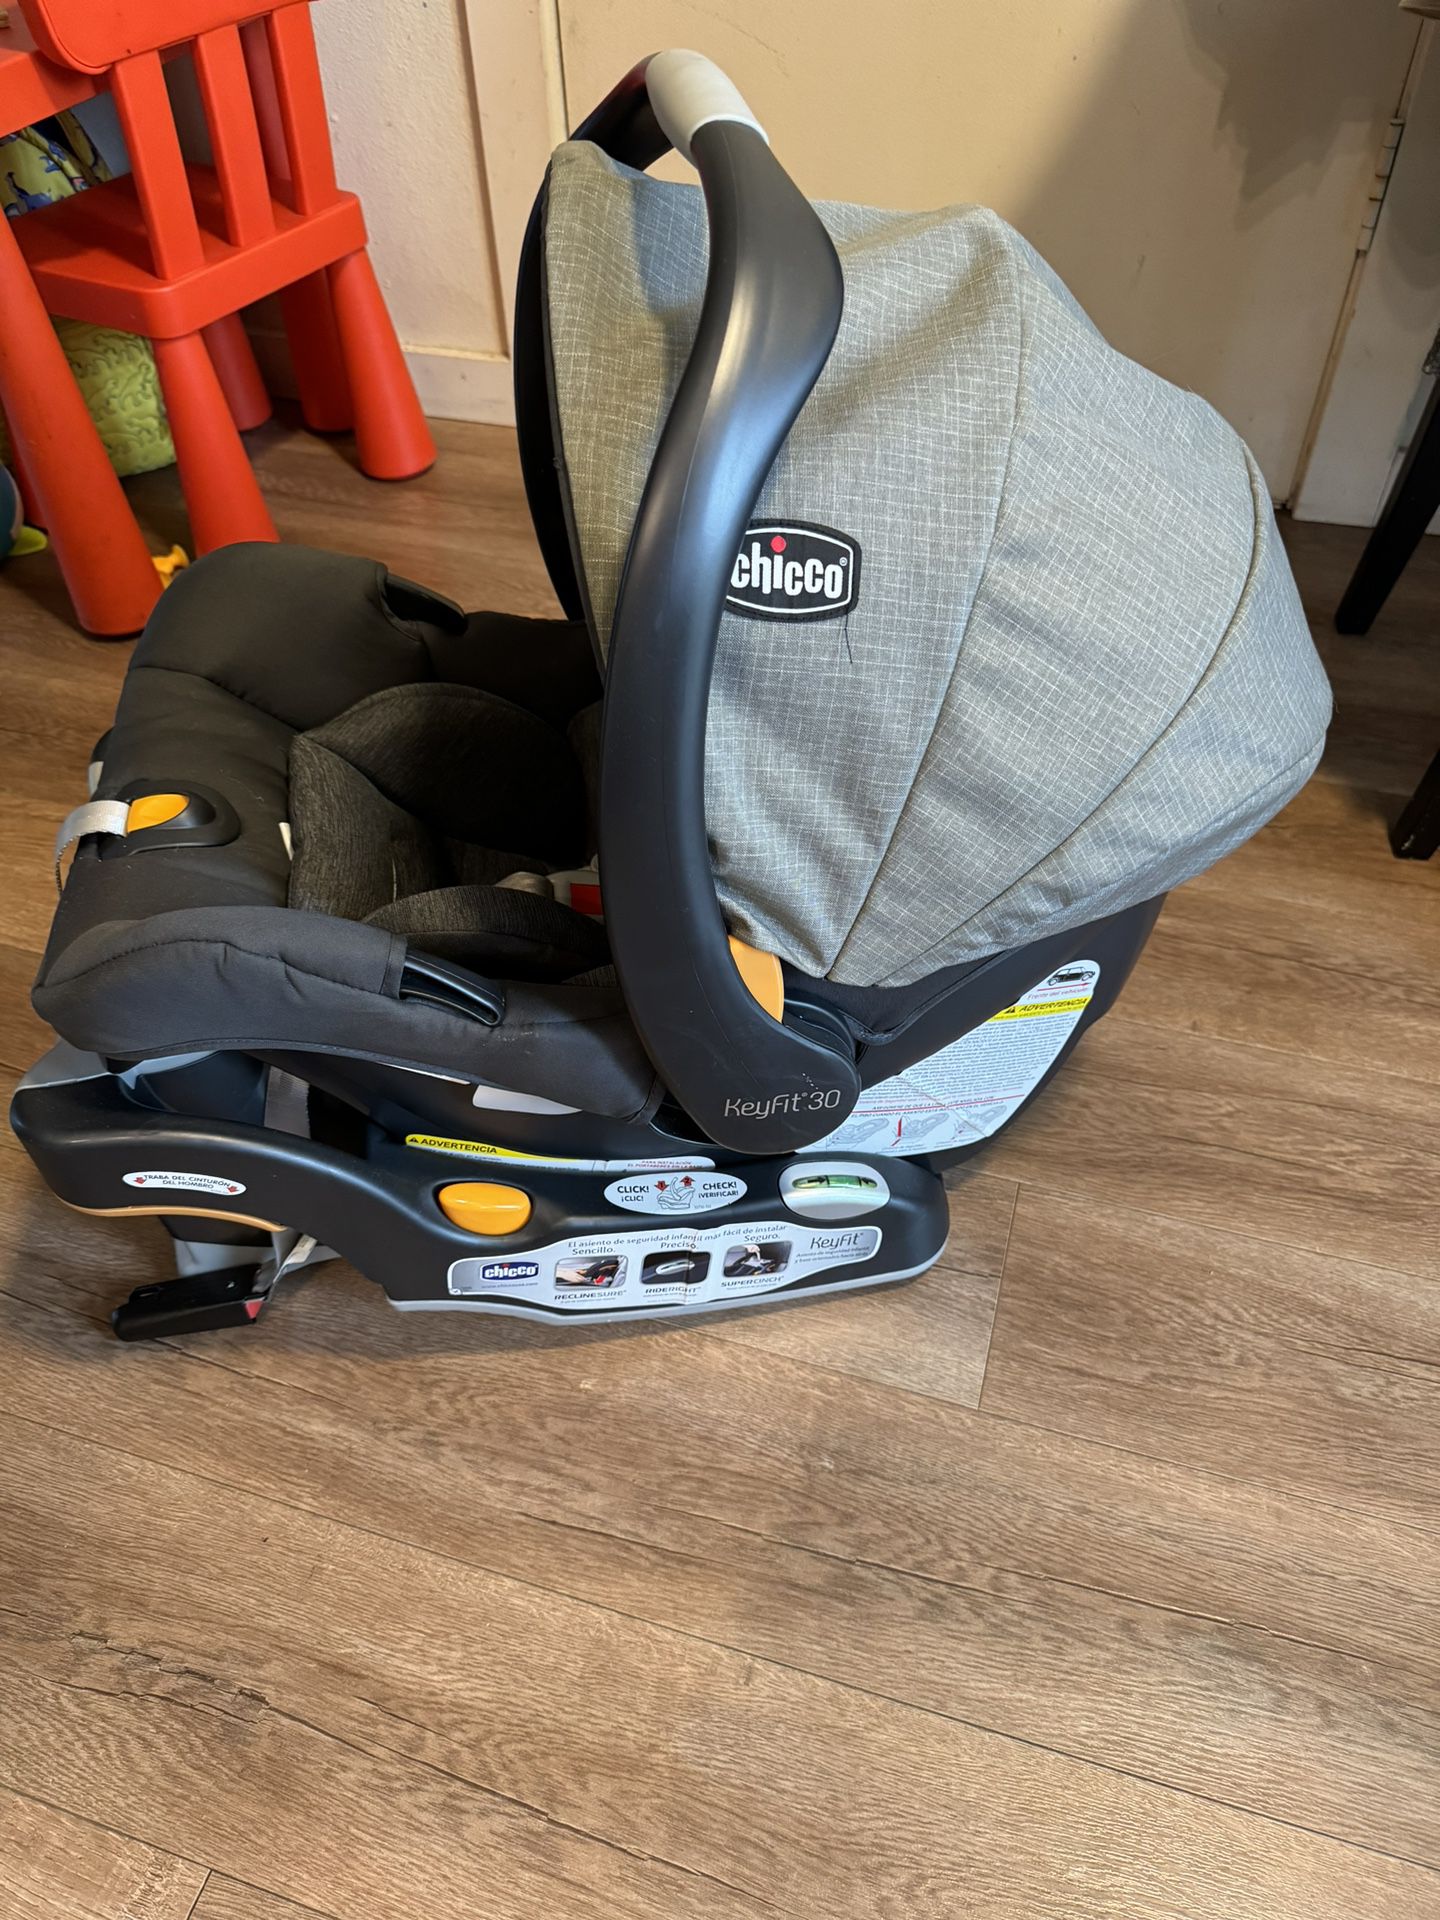 Chicco key Fit Car Seat 